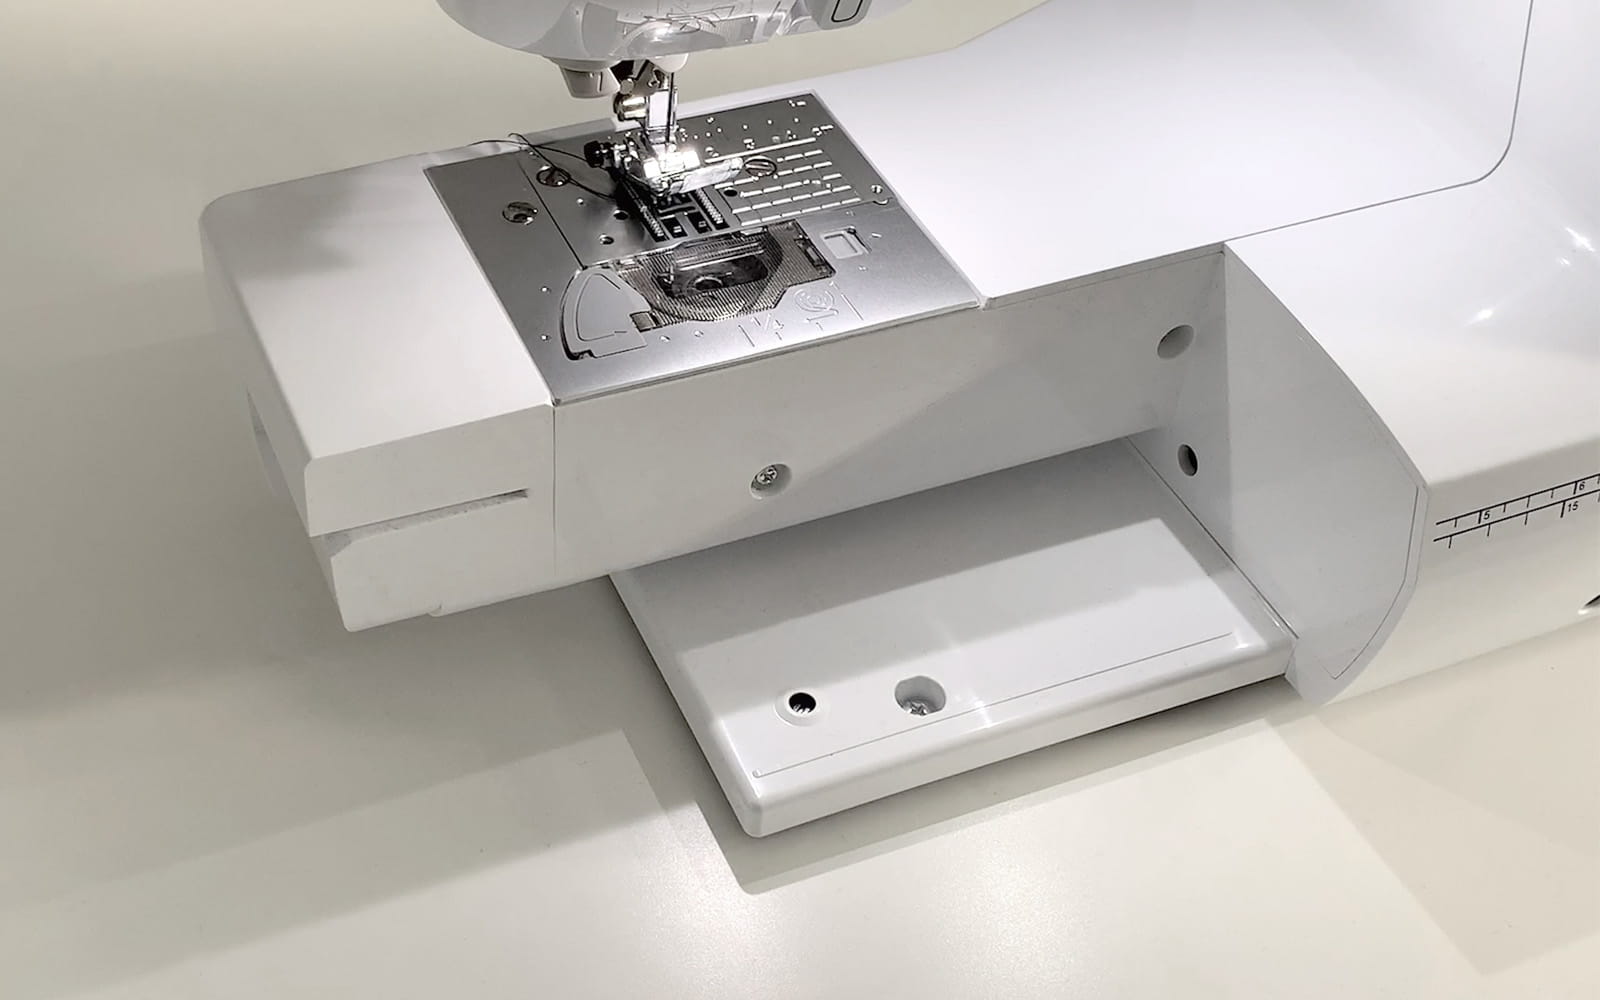 Brother sewing machine with accessory tray remove to make free arm